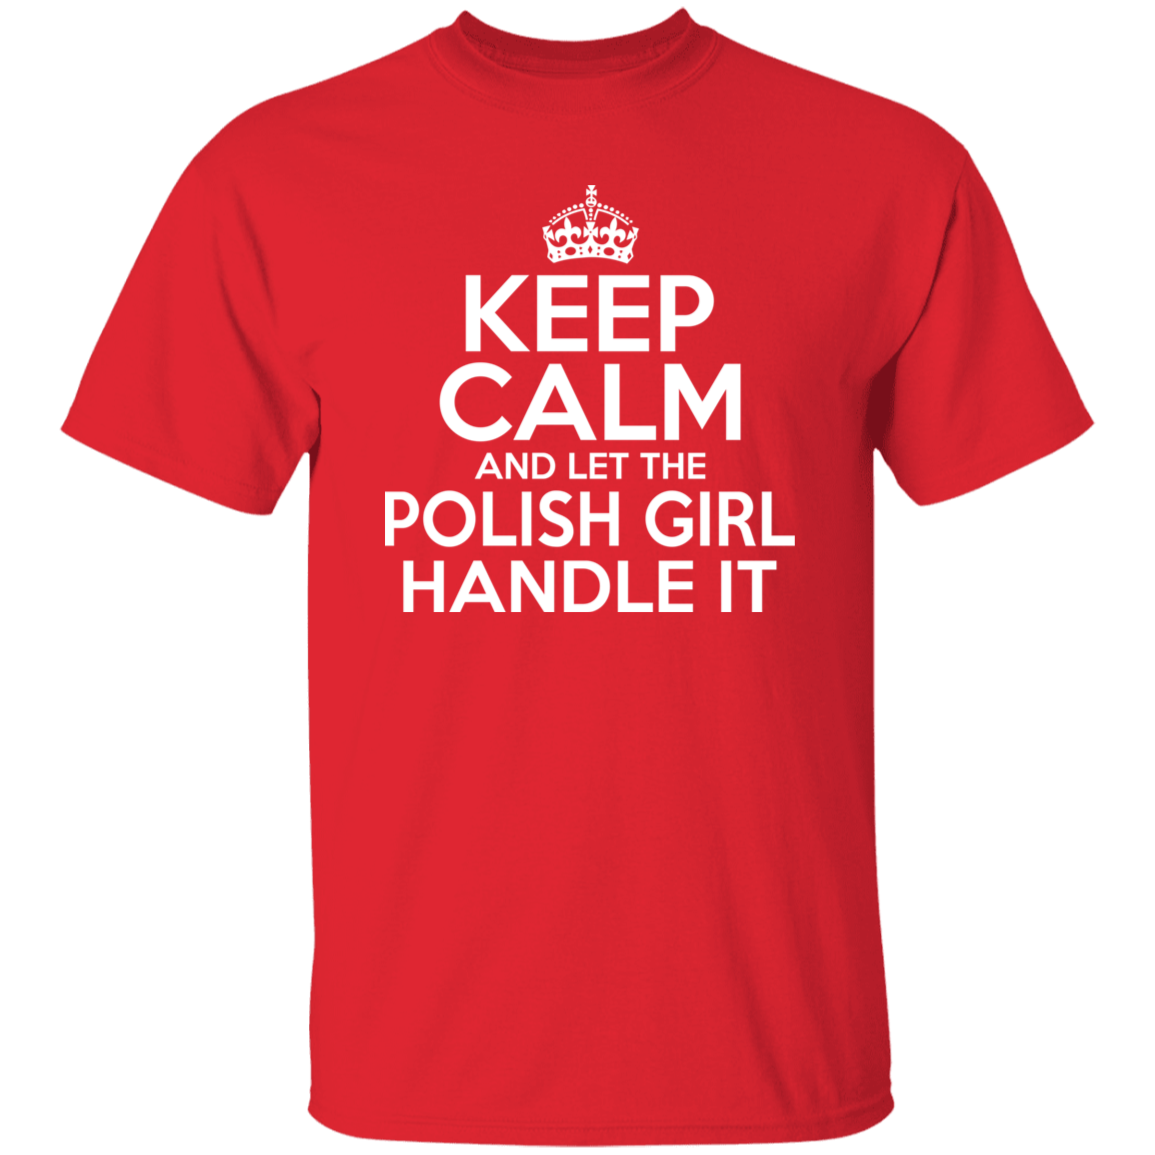 Keep Calm And Let The Polish Girl Handle It Apparel CustomCat G500 5.3 oz. T-Shirt Red S